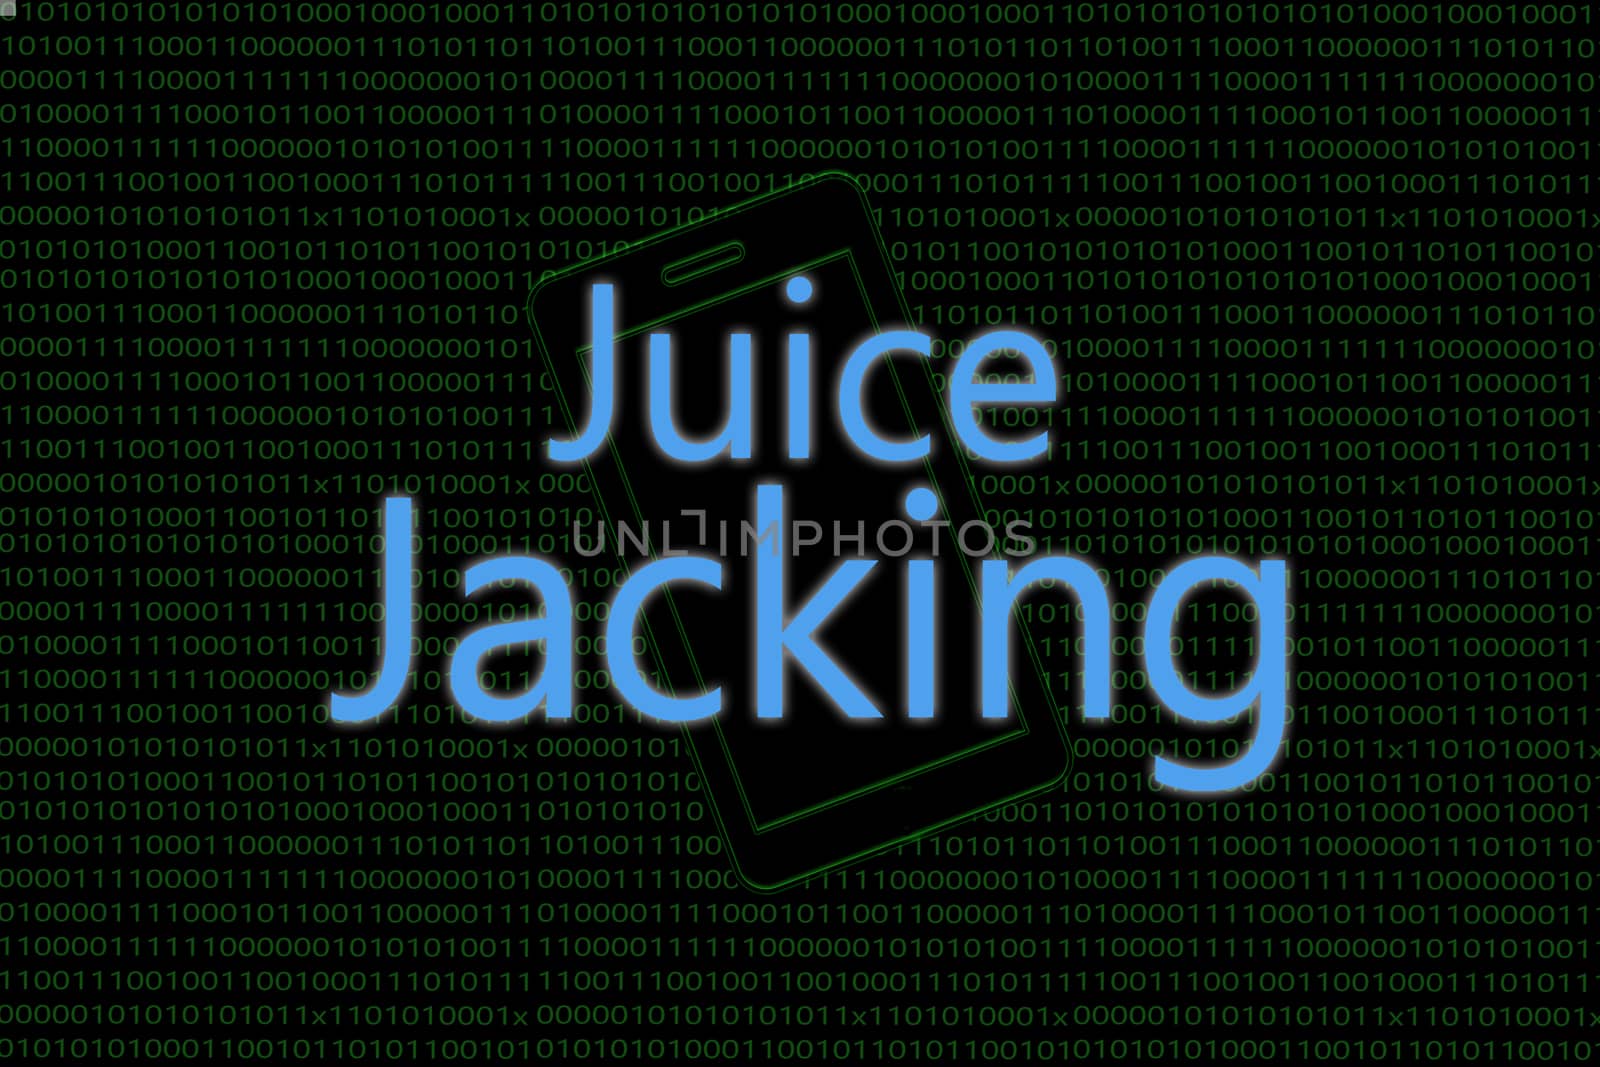 illustrative example showing of Juice Jacking or Hacking a cyber attack done on mobile.